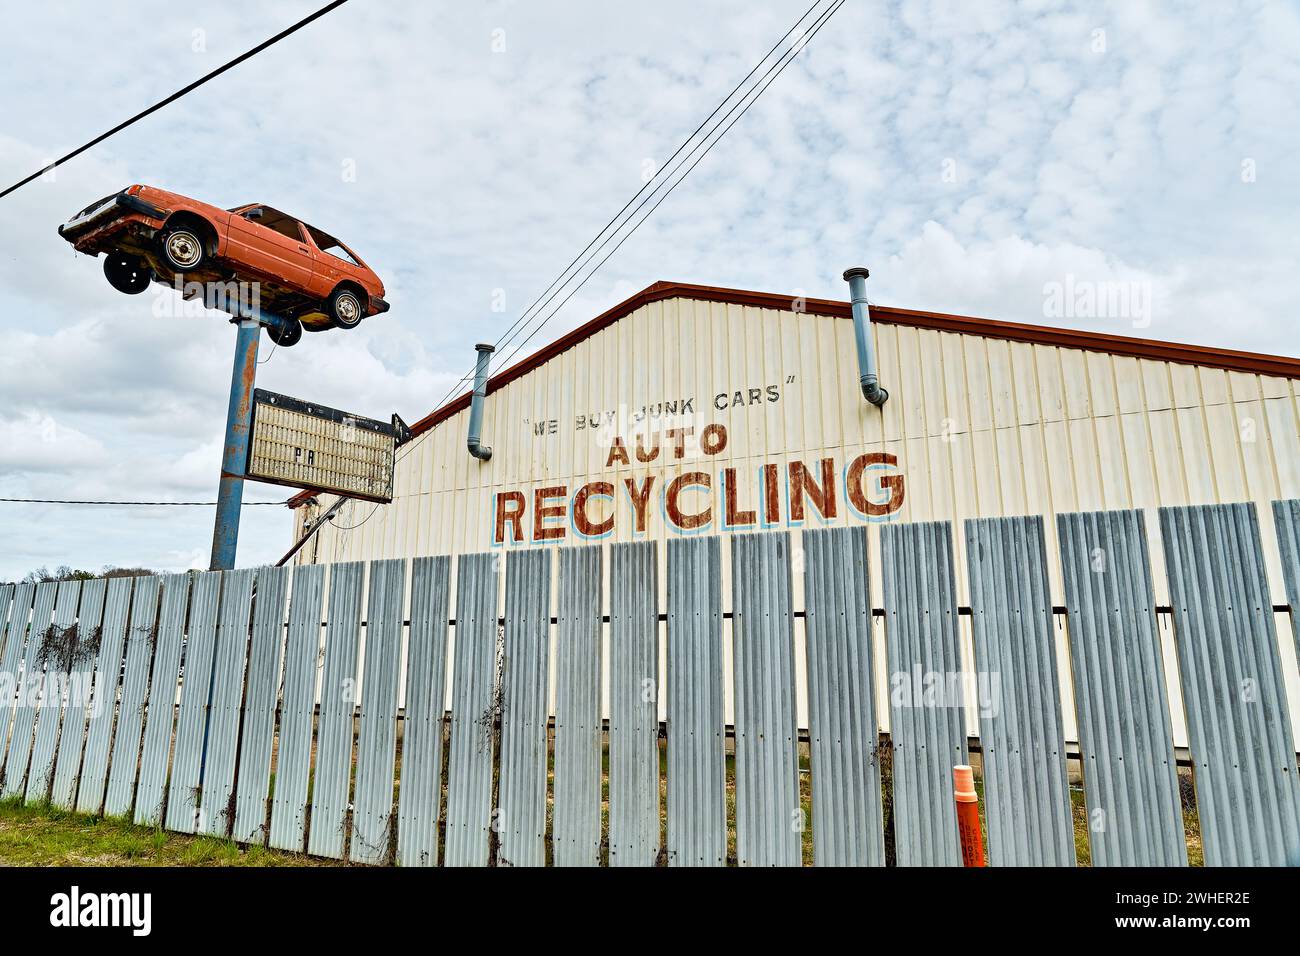 Auto recycling business with a car on a pole in front where junk or junked cars are recycled in Montgomery Alabama, USA. Stock Photo